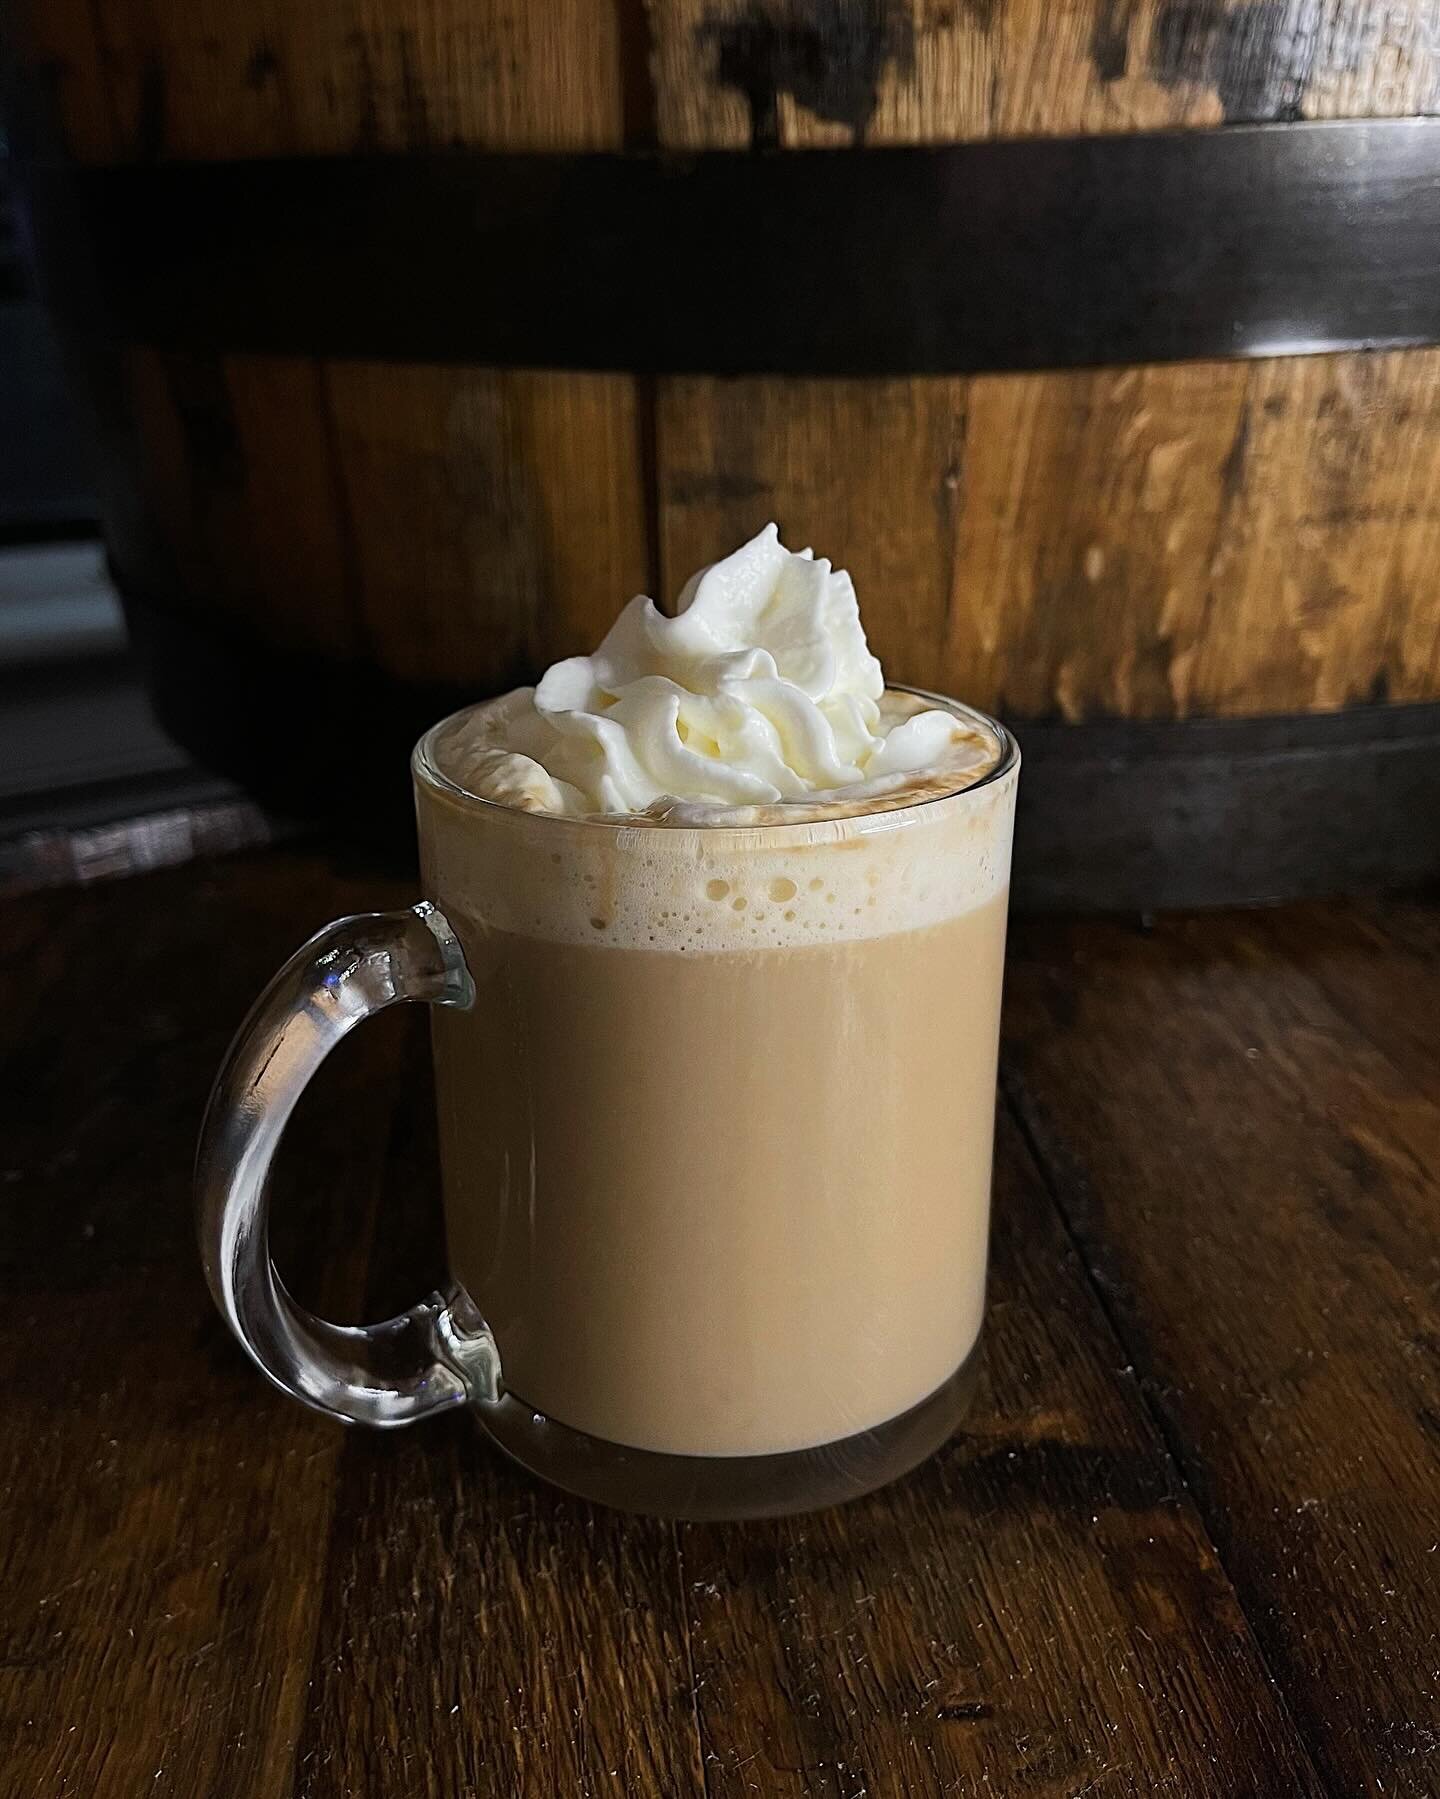 🍀 St. Patricks weekend is here! 🍀
Our Nashville tasting room will have their drink specials running all day today and tomorrow! Irish coffee, house made Irish cream, Guinness old fashioned&rsquo;s, baby Guinness shots with coffee infused rye, &amp;